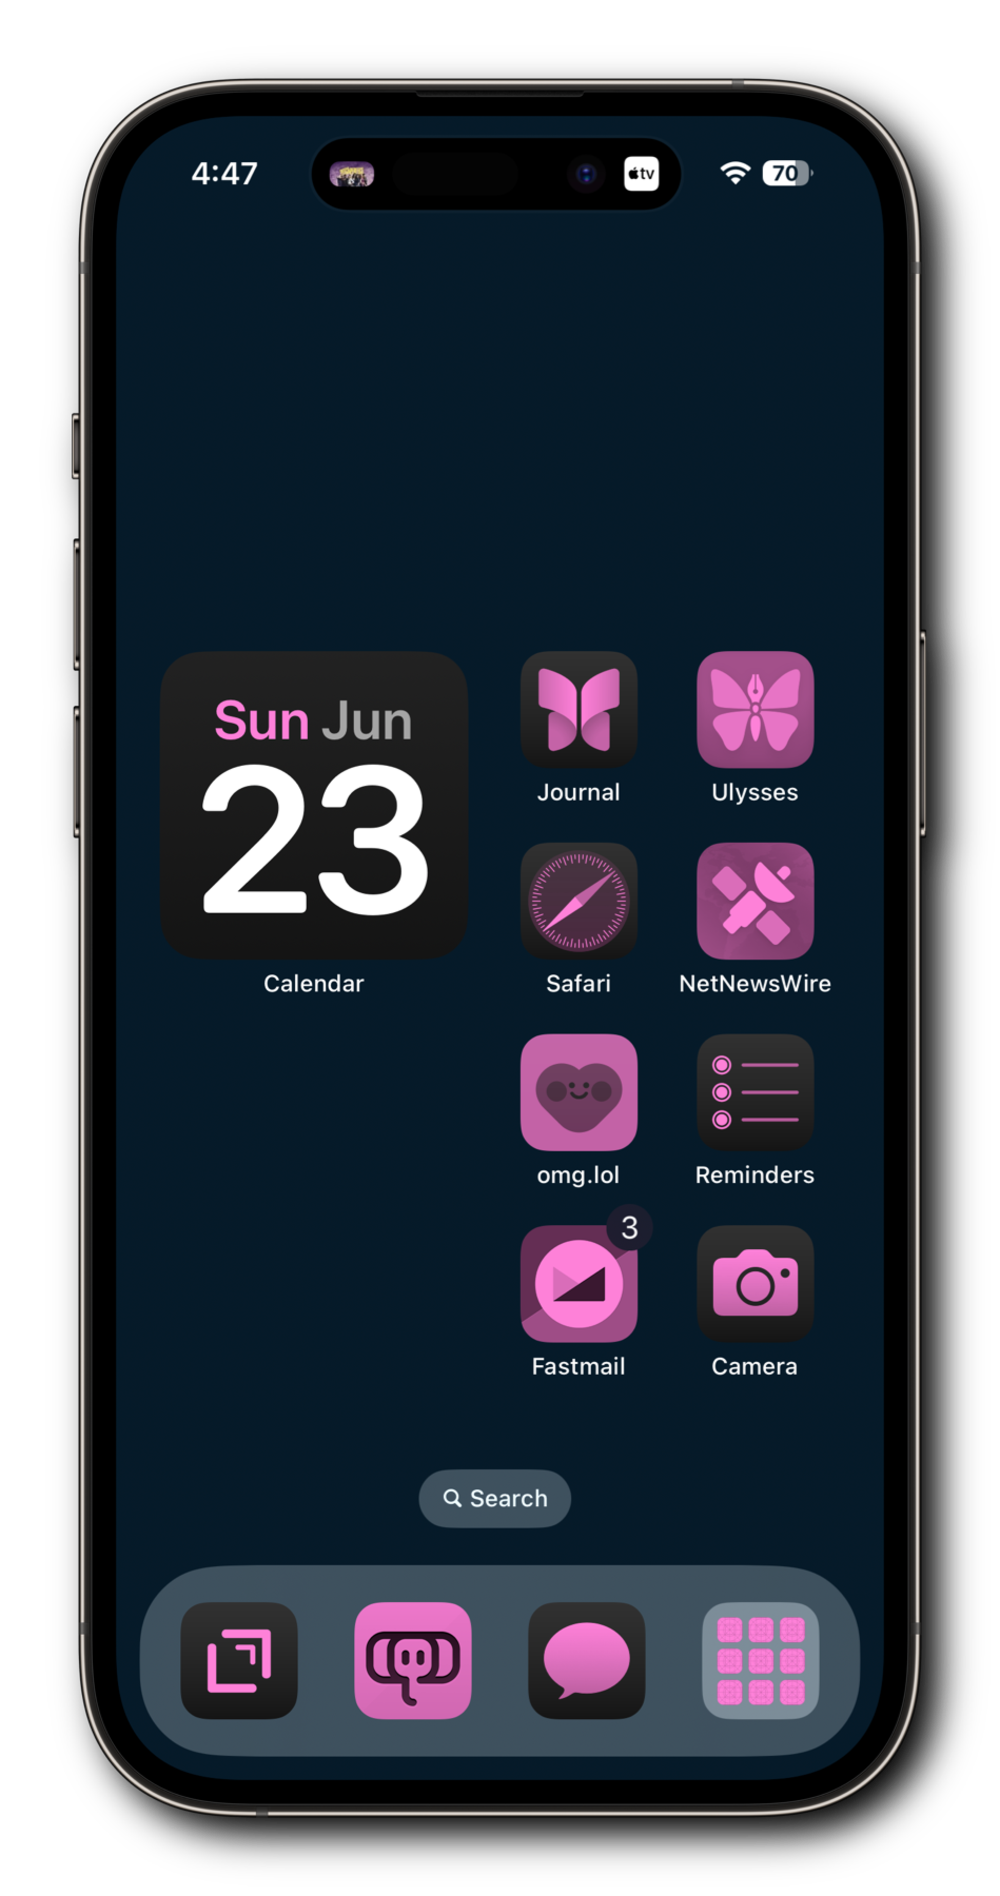 A smartphone home screen with a dark blue background and various app icons. The icons are predominantly in pink and include Calendar, Journal, Ulysses, Safari, NetNewsWire, omg.lol, Reminders, Fastmail, and Camera. 